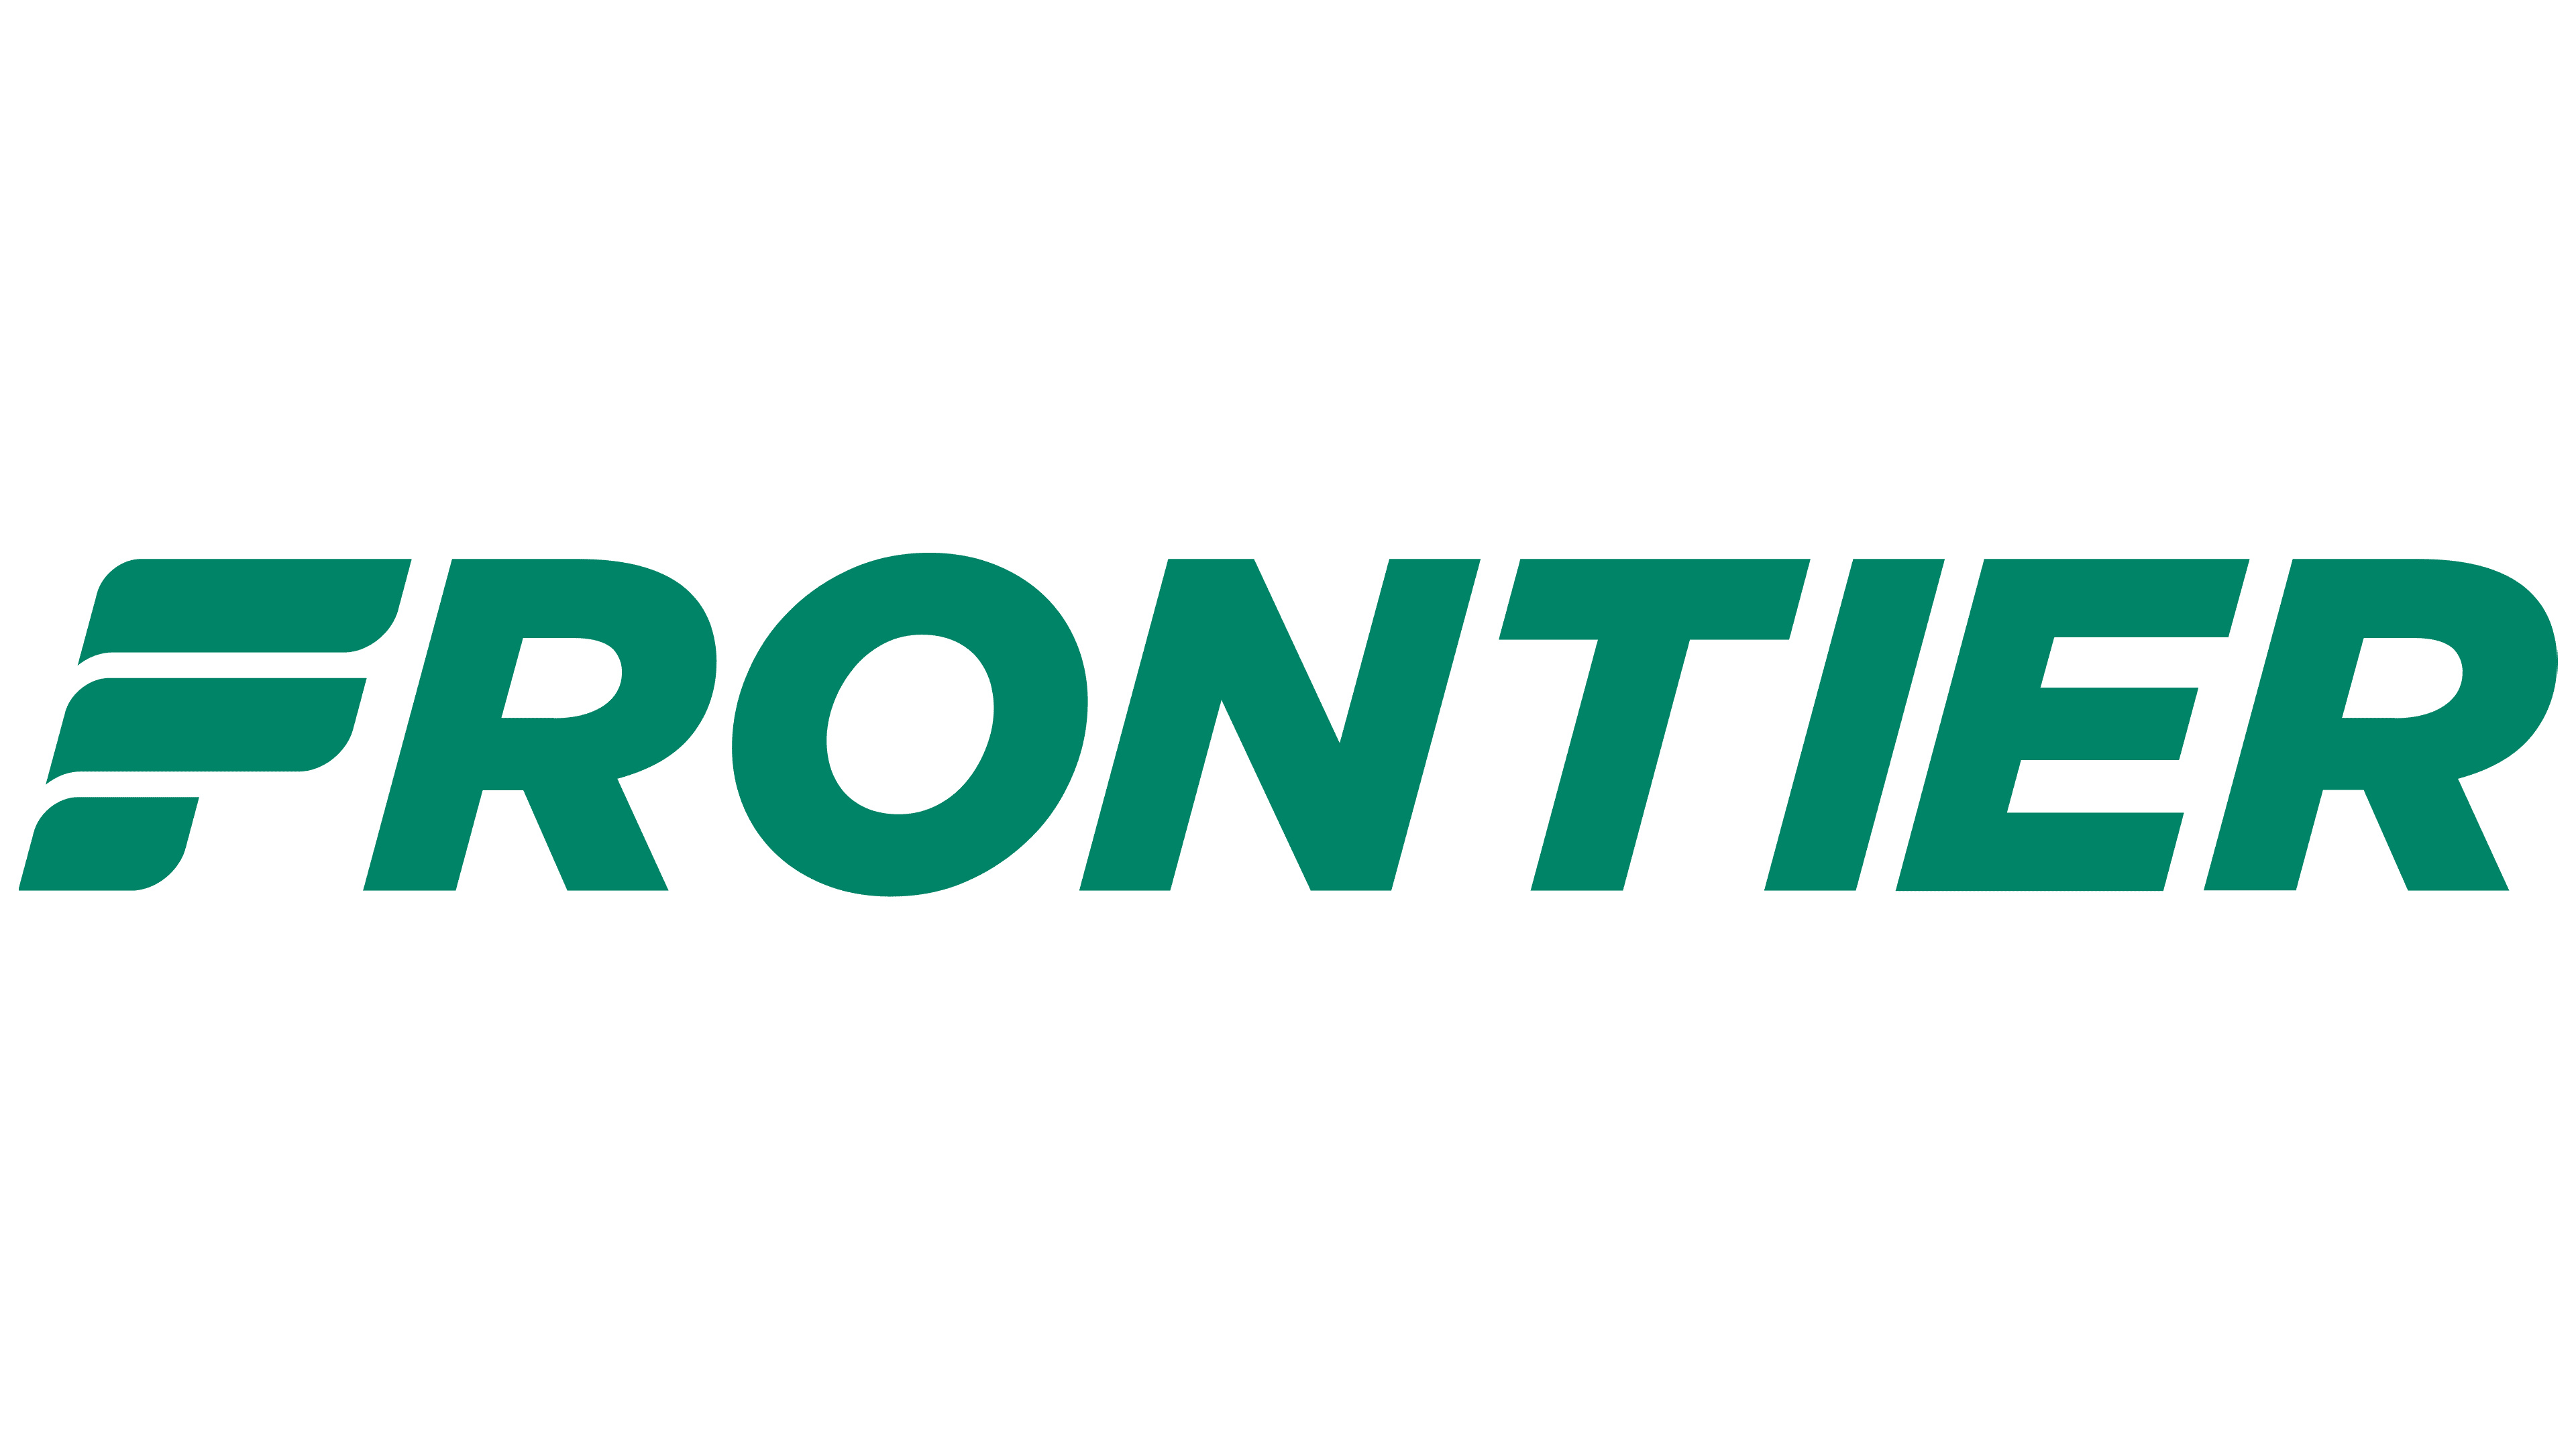 Frontier Airlines (Travels), Frontier Airlines logo, Symbol meaning, History, 3840x2160 4K Desktop